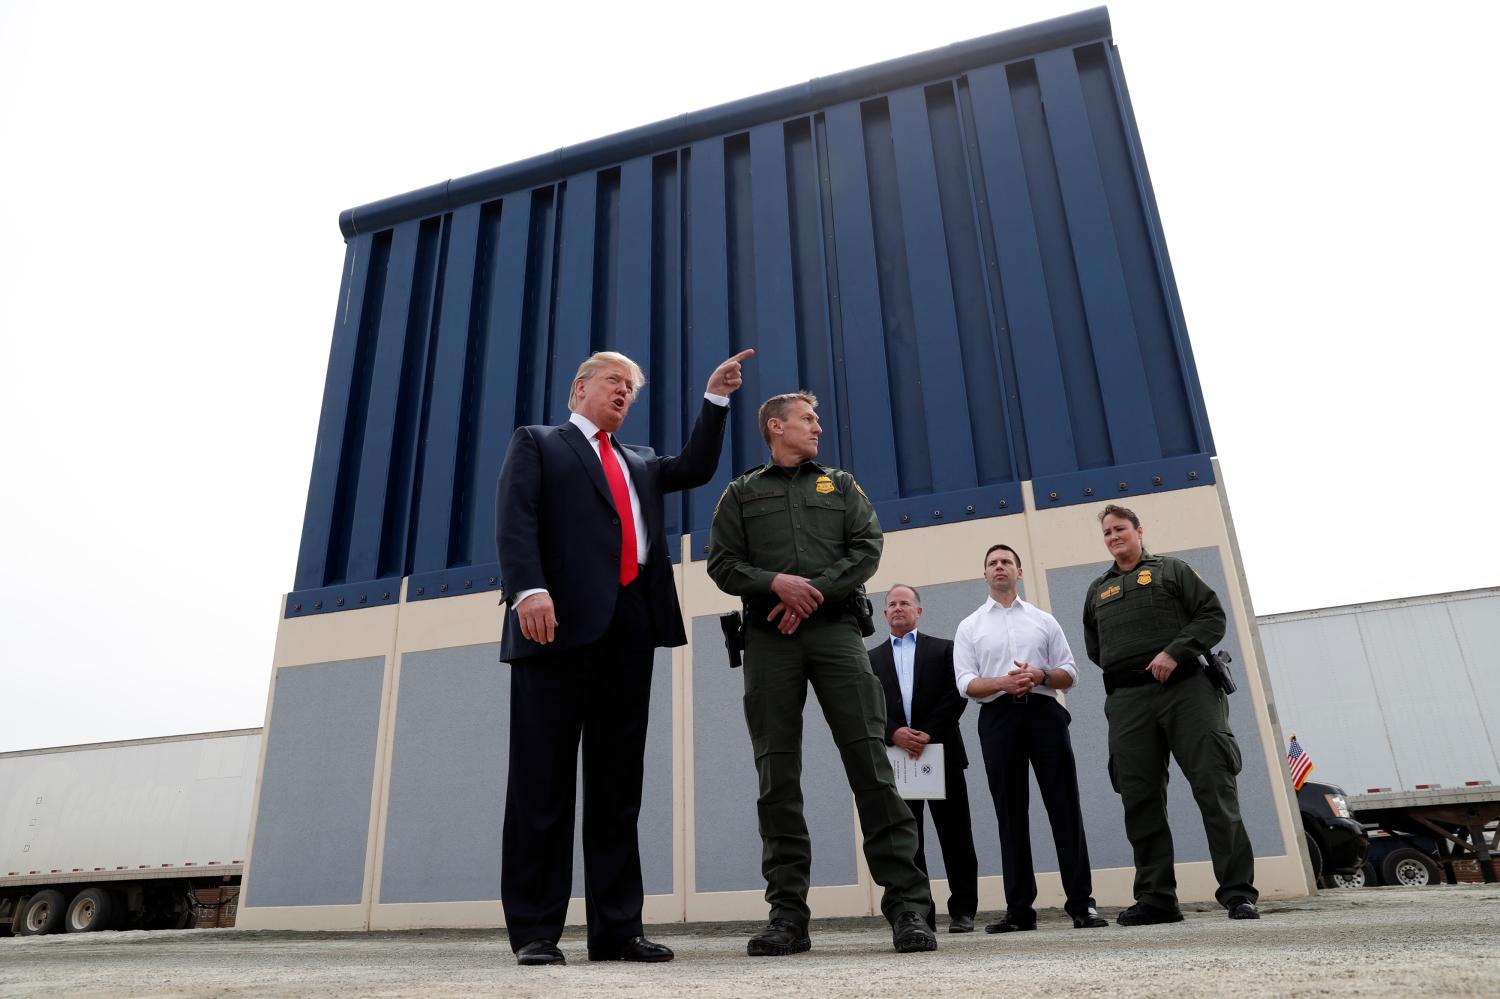 Trump with demo wall